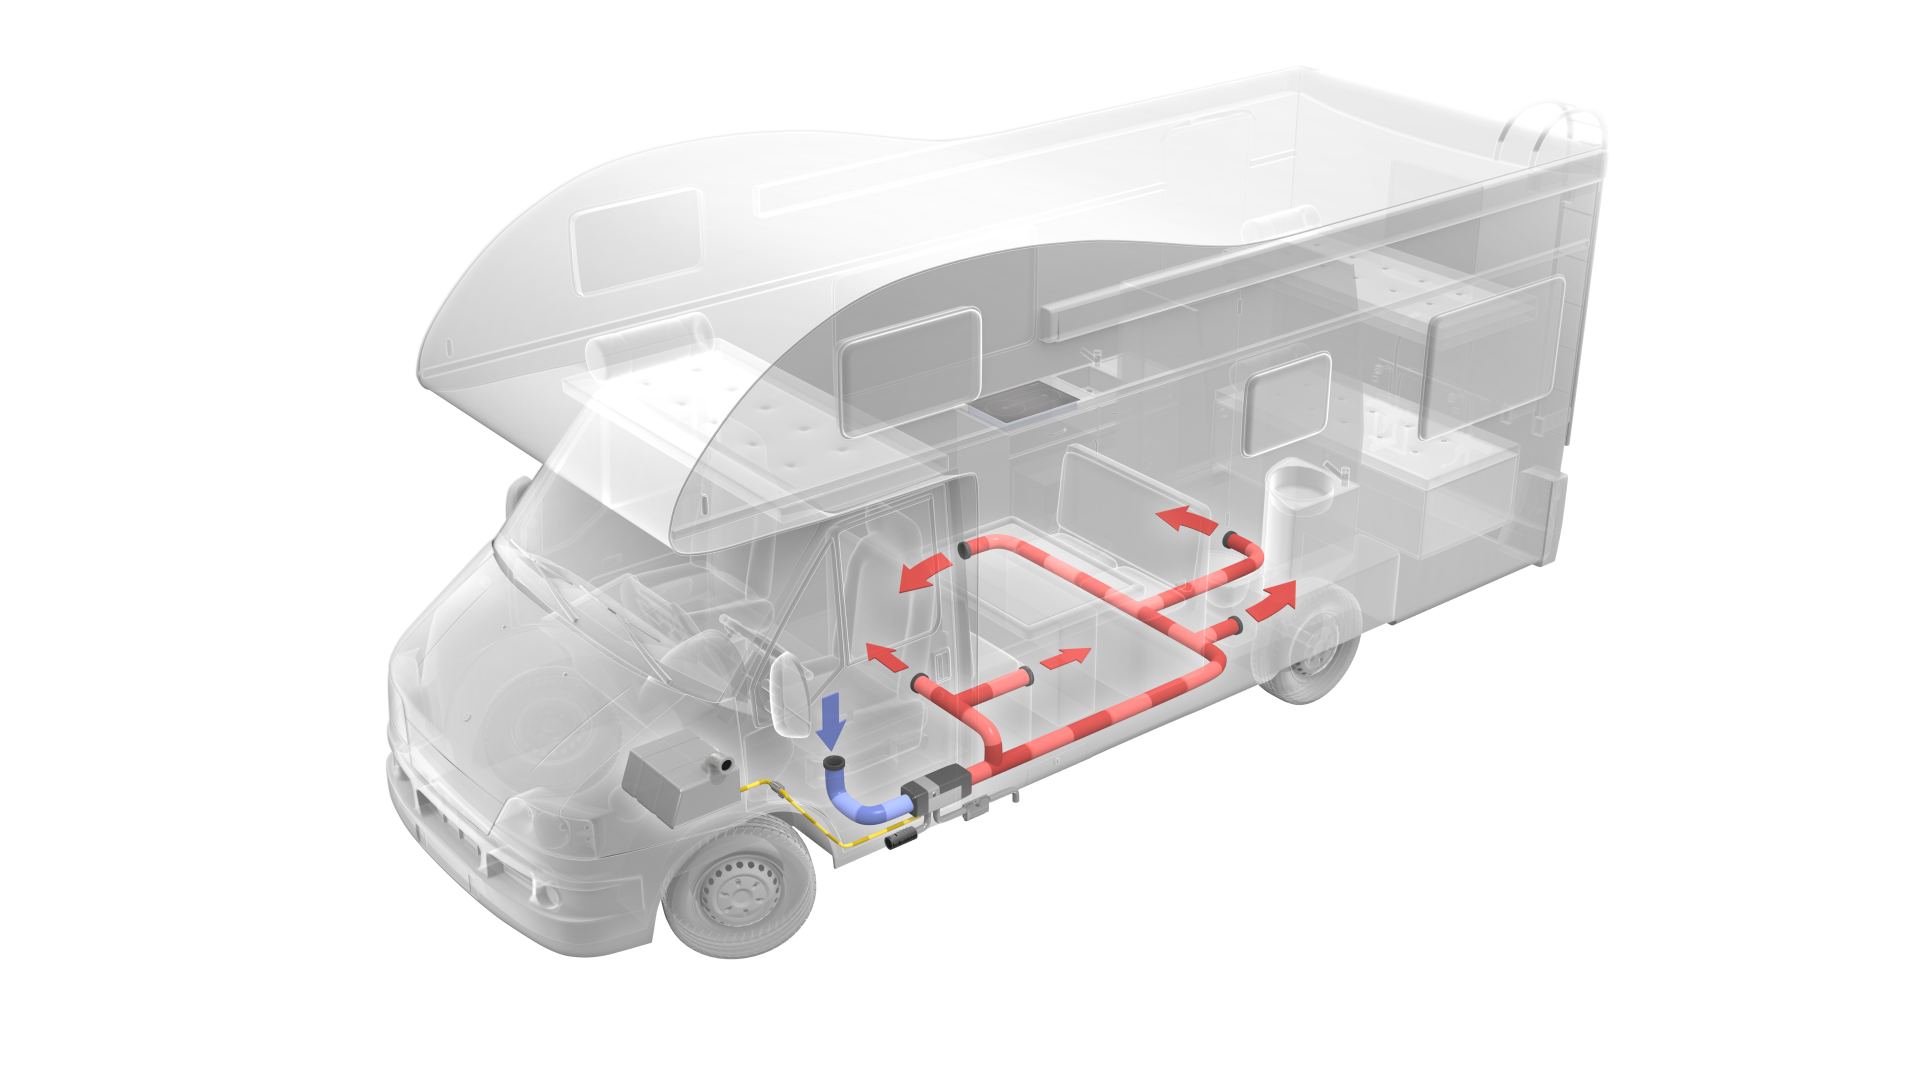 Illustration of Webasto Air Top in a recreational vehicle